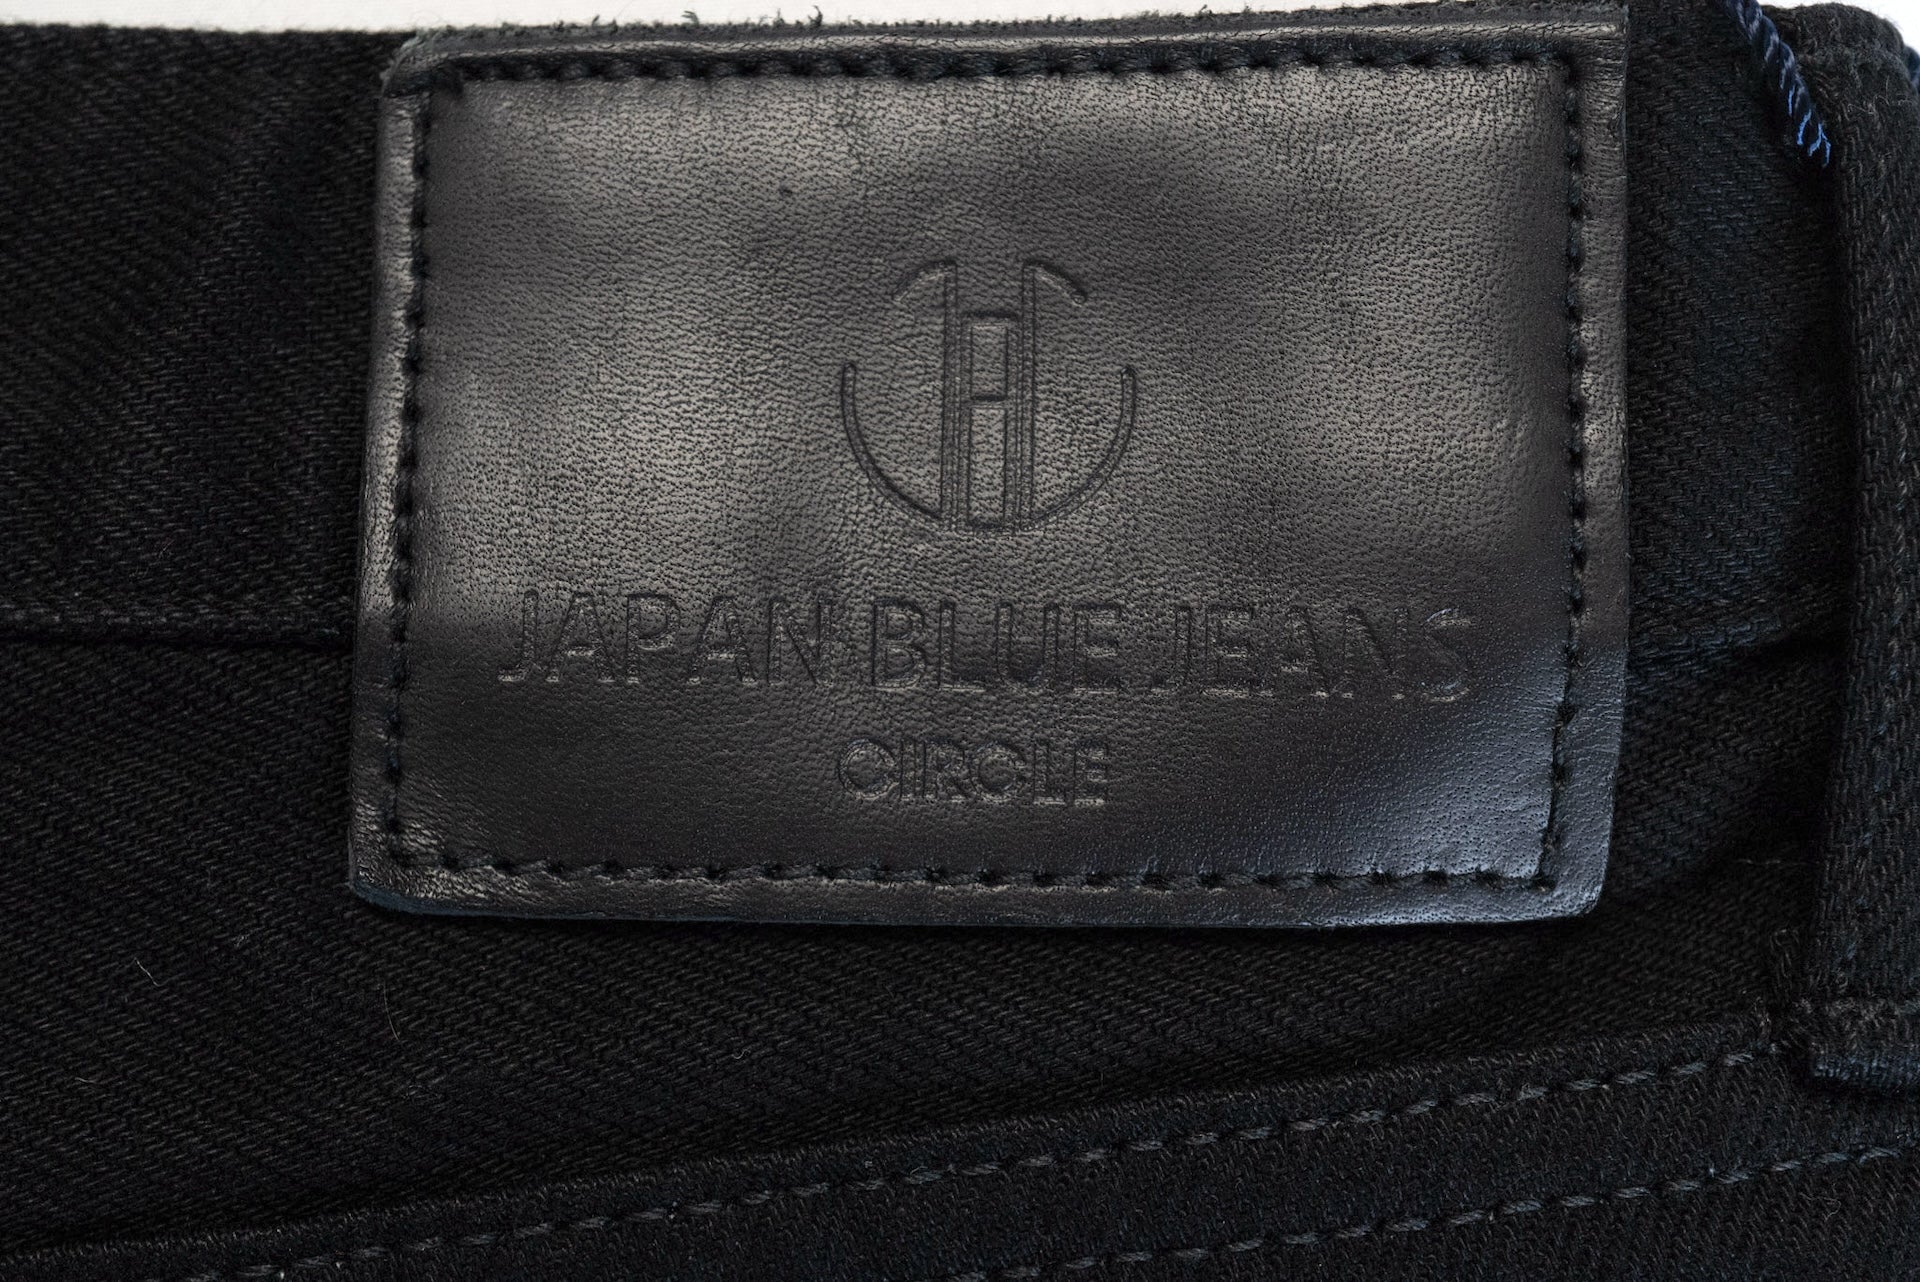 Japan Blue 14oz Double Black 'Circle' Denim (Straight Tapered Fit)